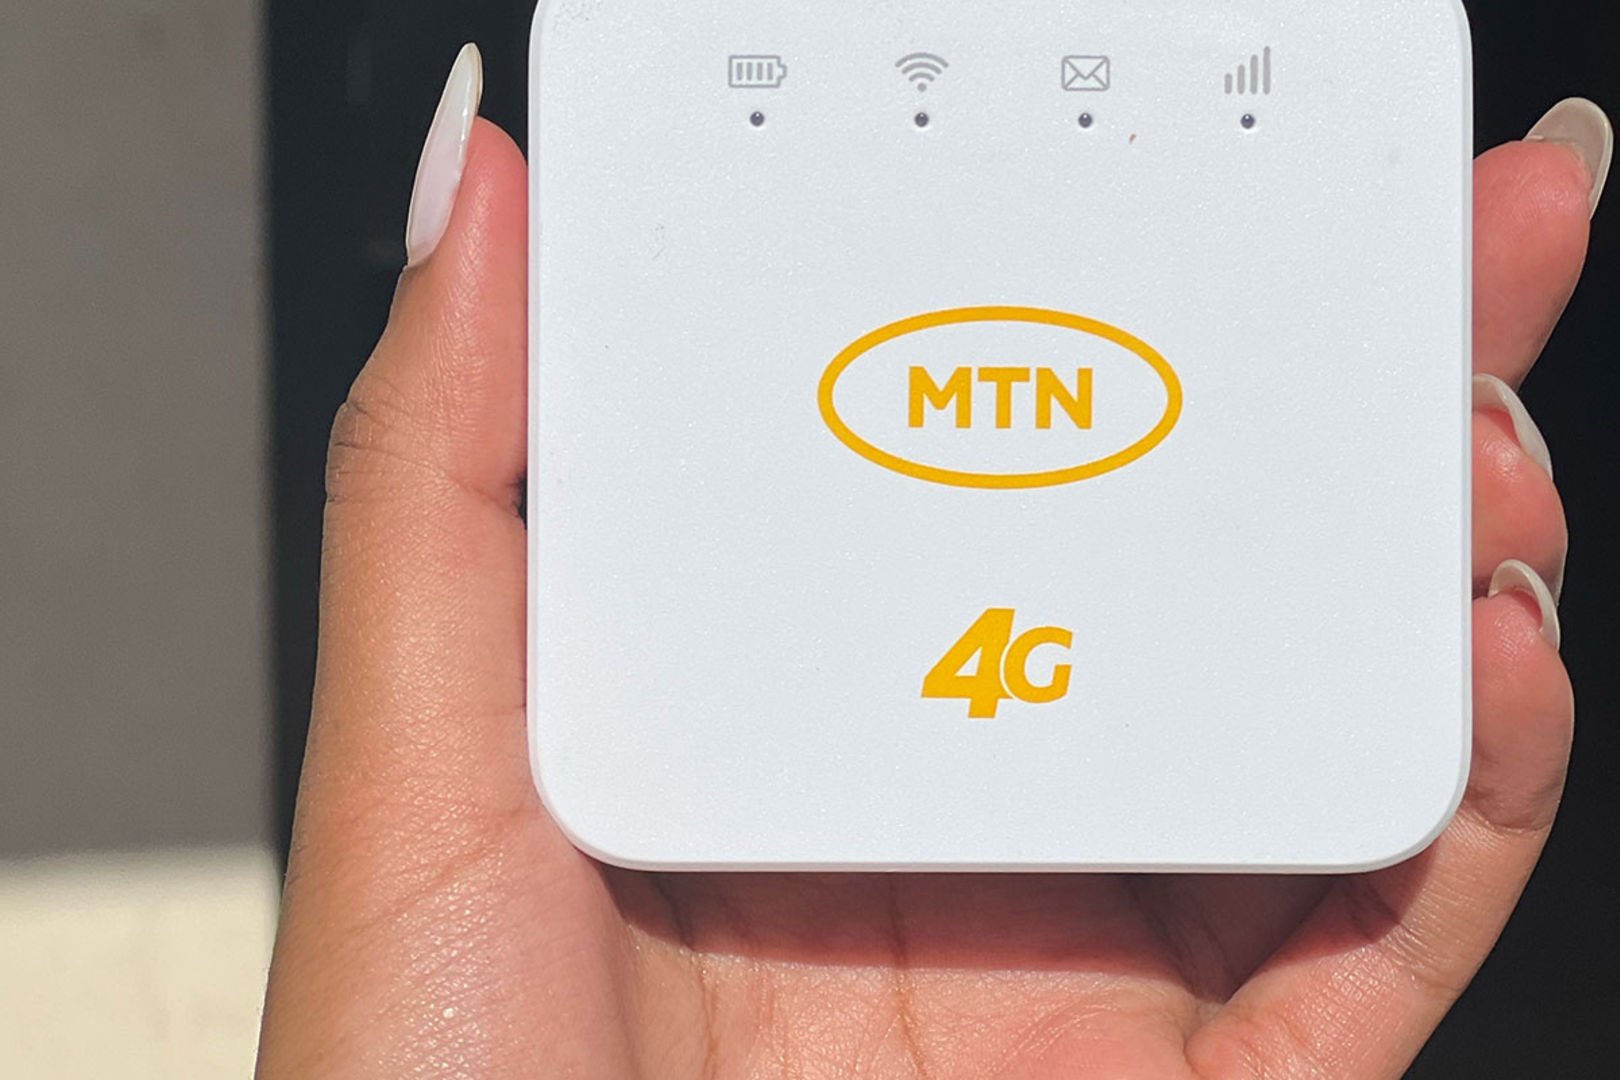 How to Change MTN Wi-Fi Password